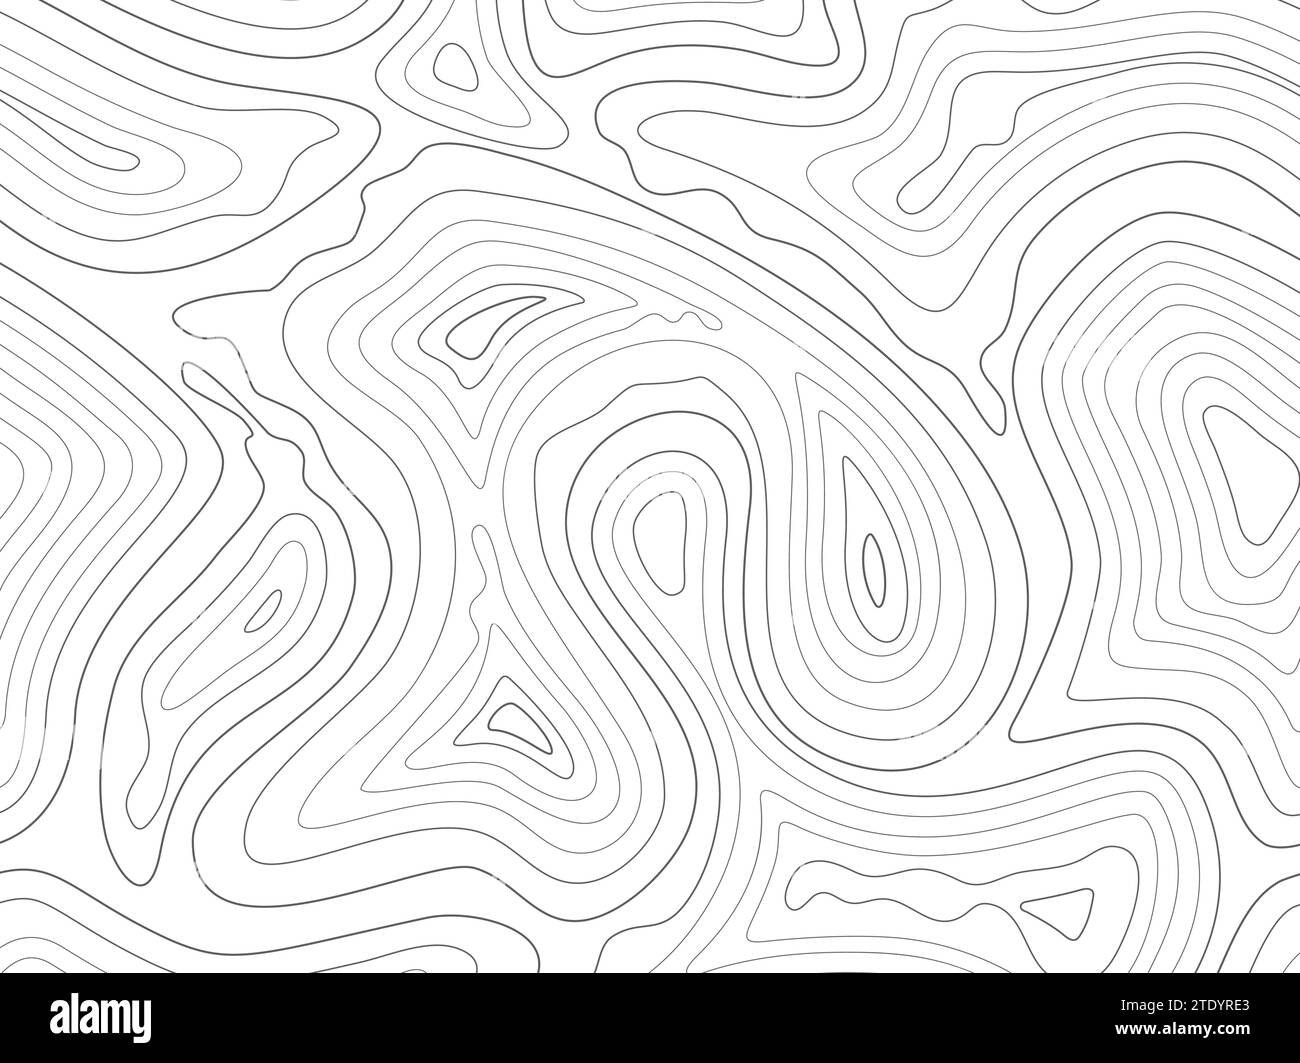 Topographic contour lines map seamless pattern Stock Vector